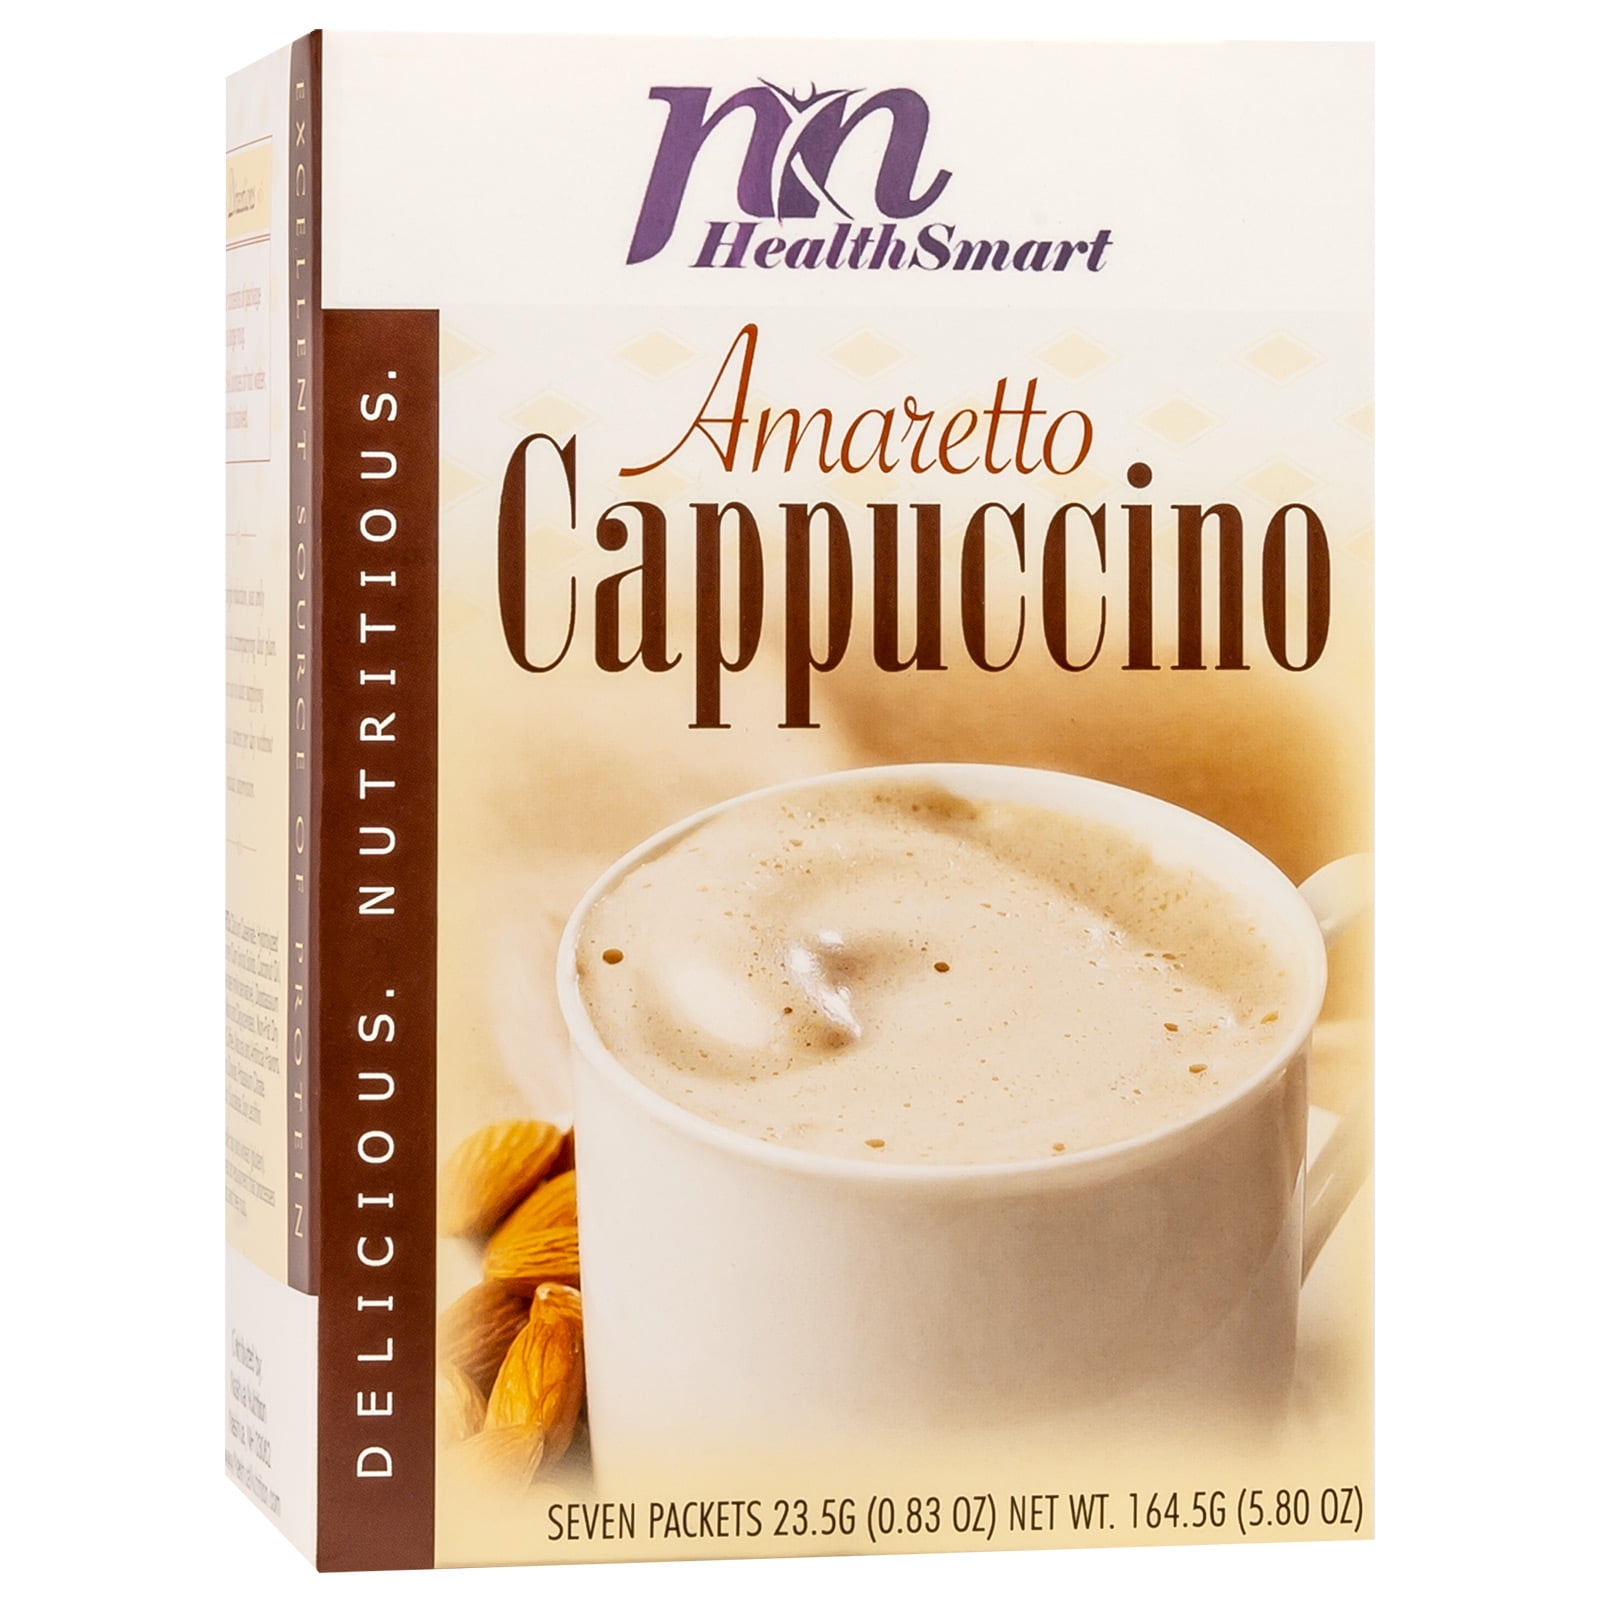 15g Protein Cappuccino by Bariatric Food Source